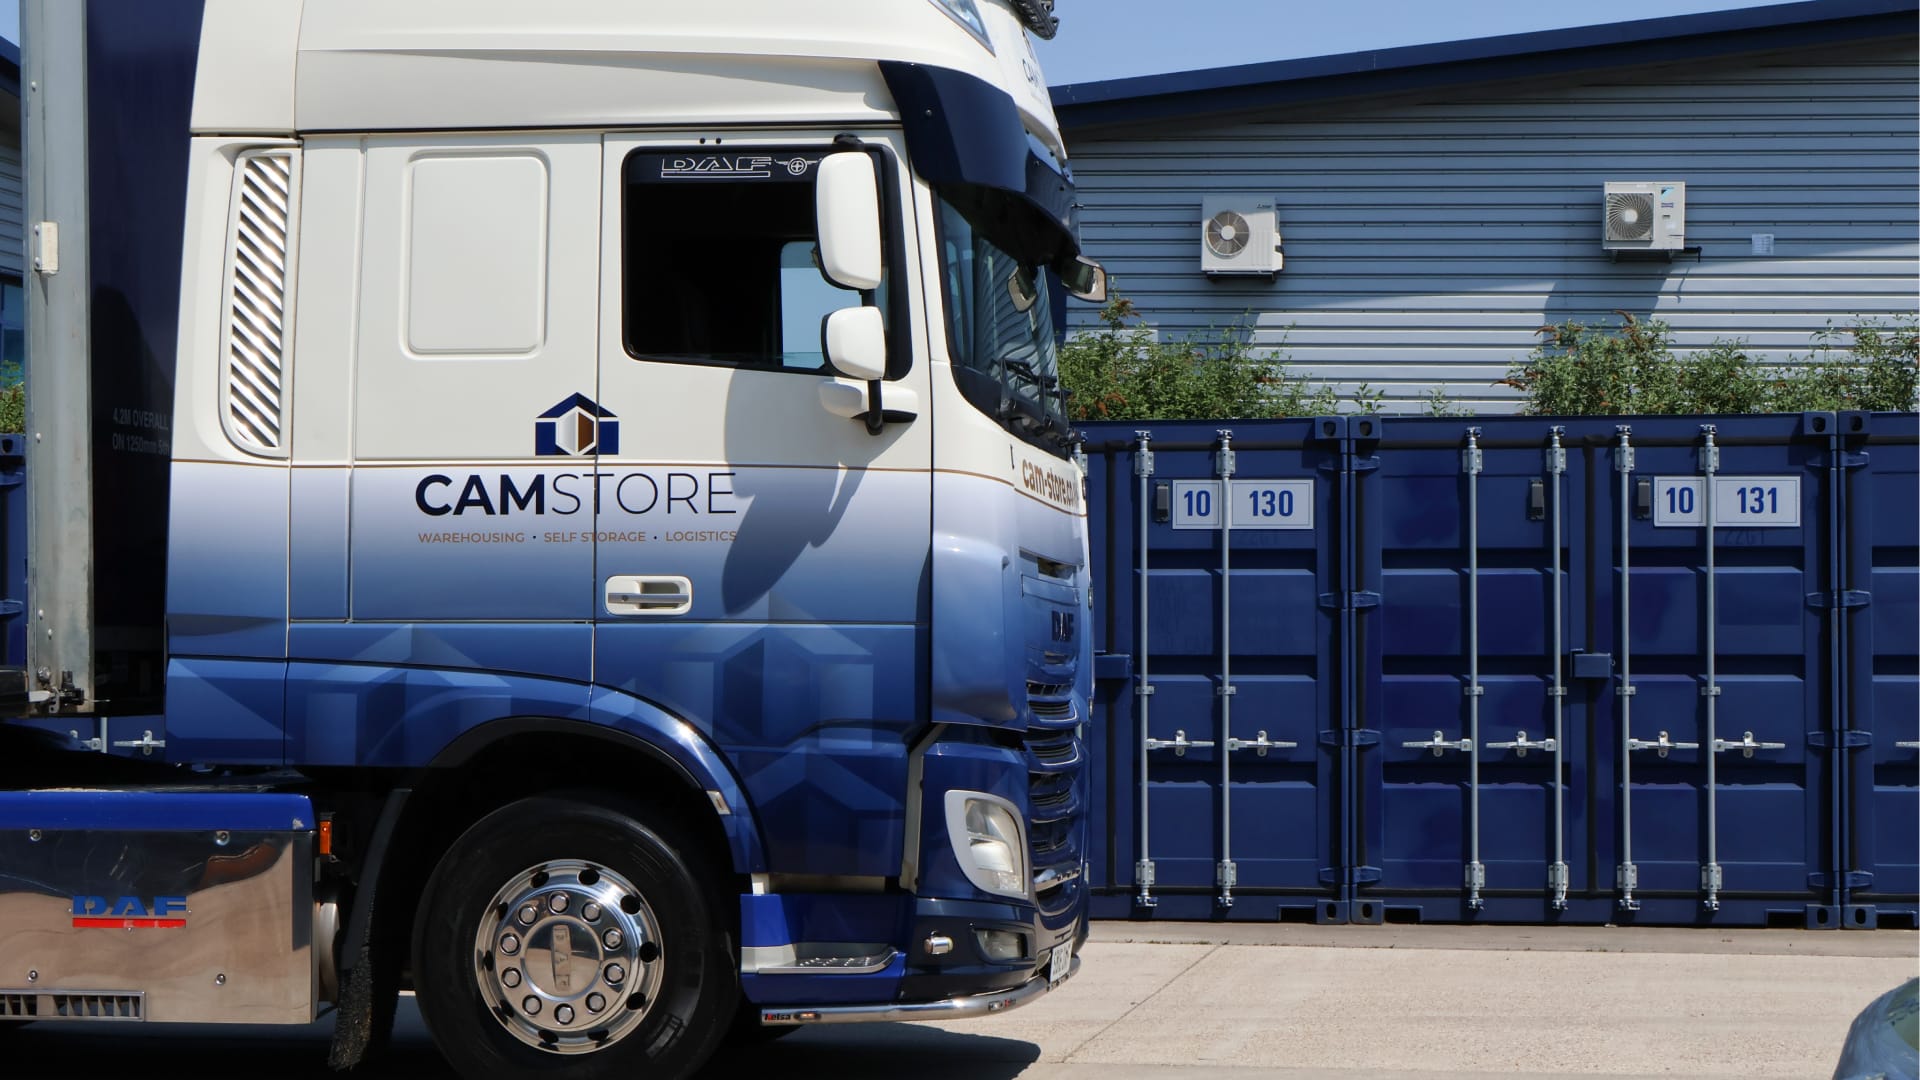 Cam Store lorry driving forward past self-storage containers.